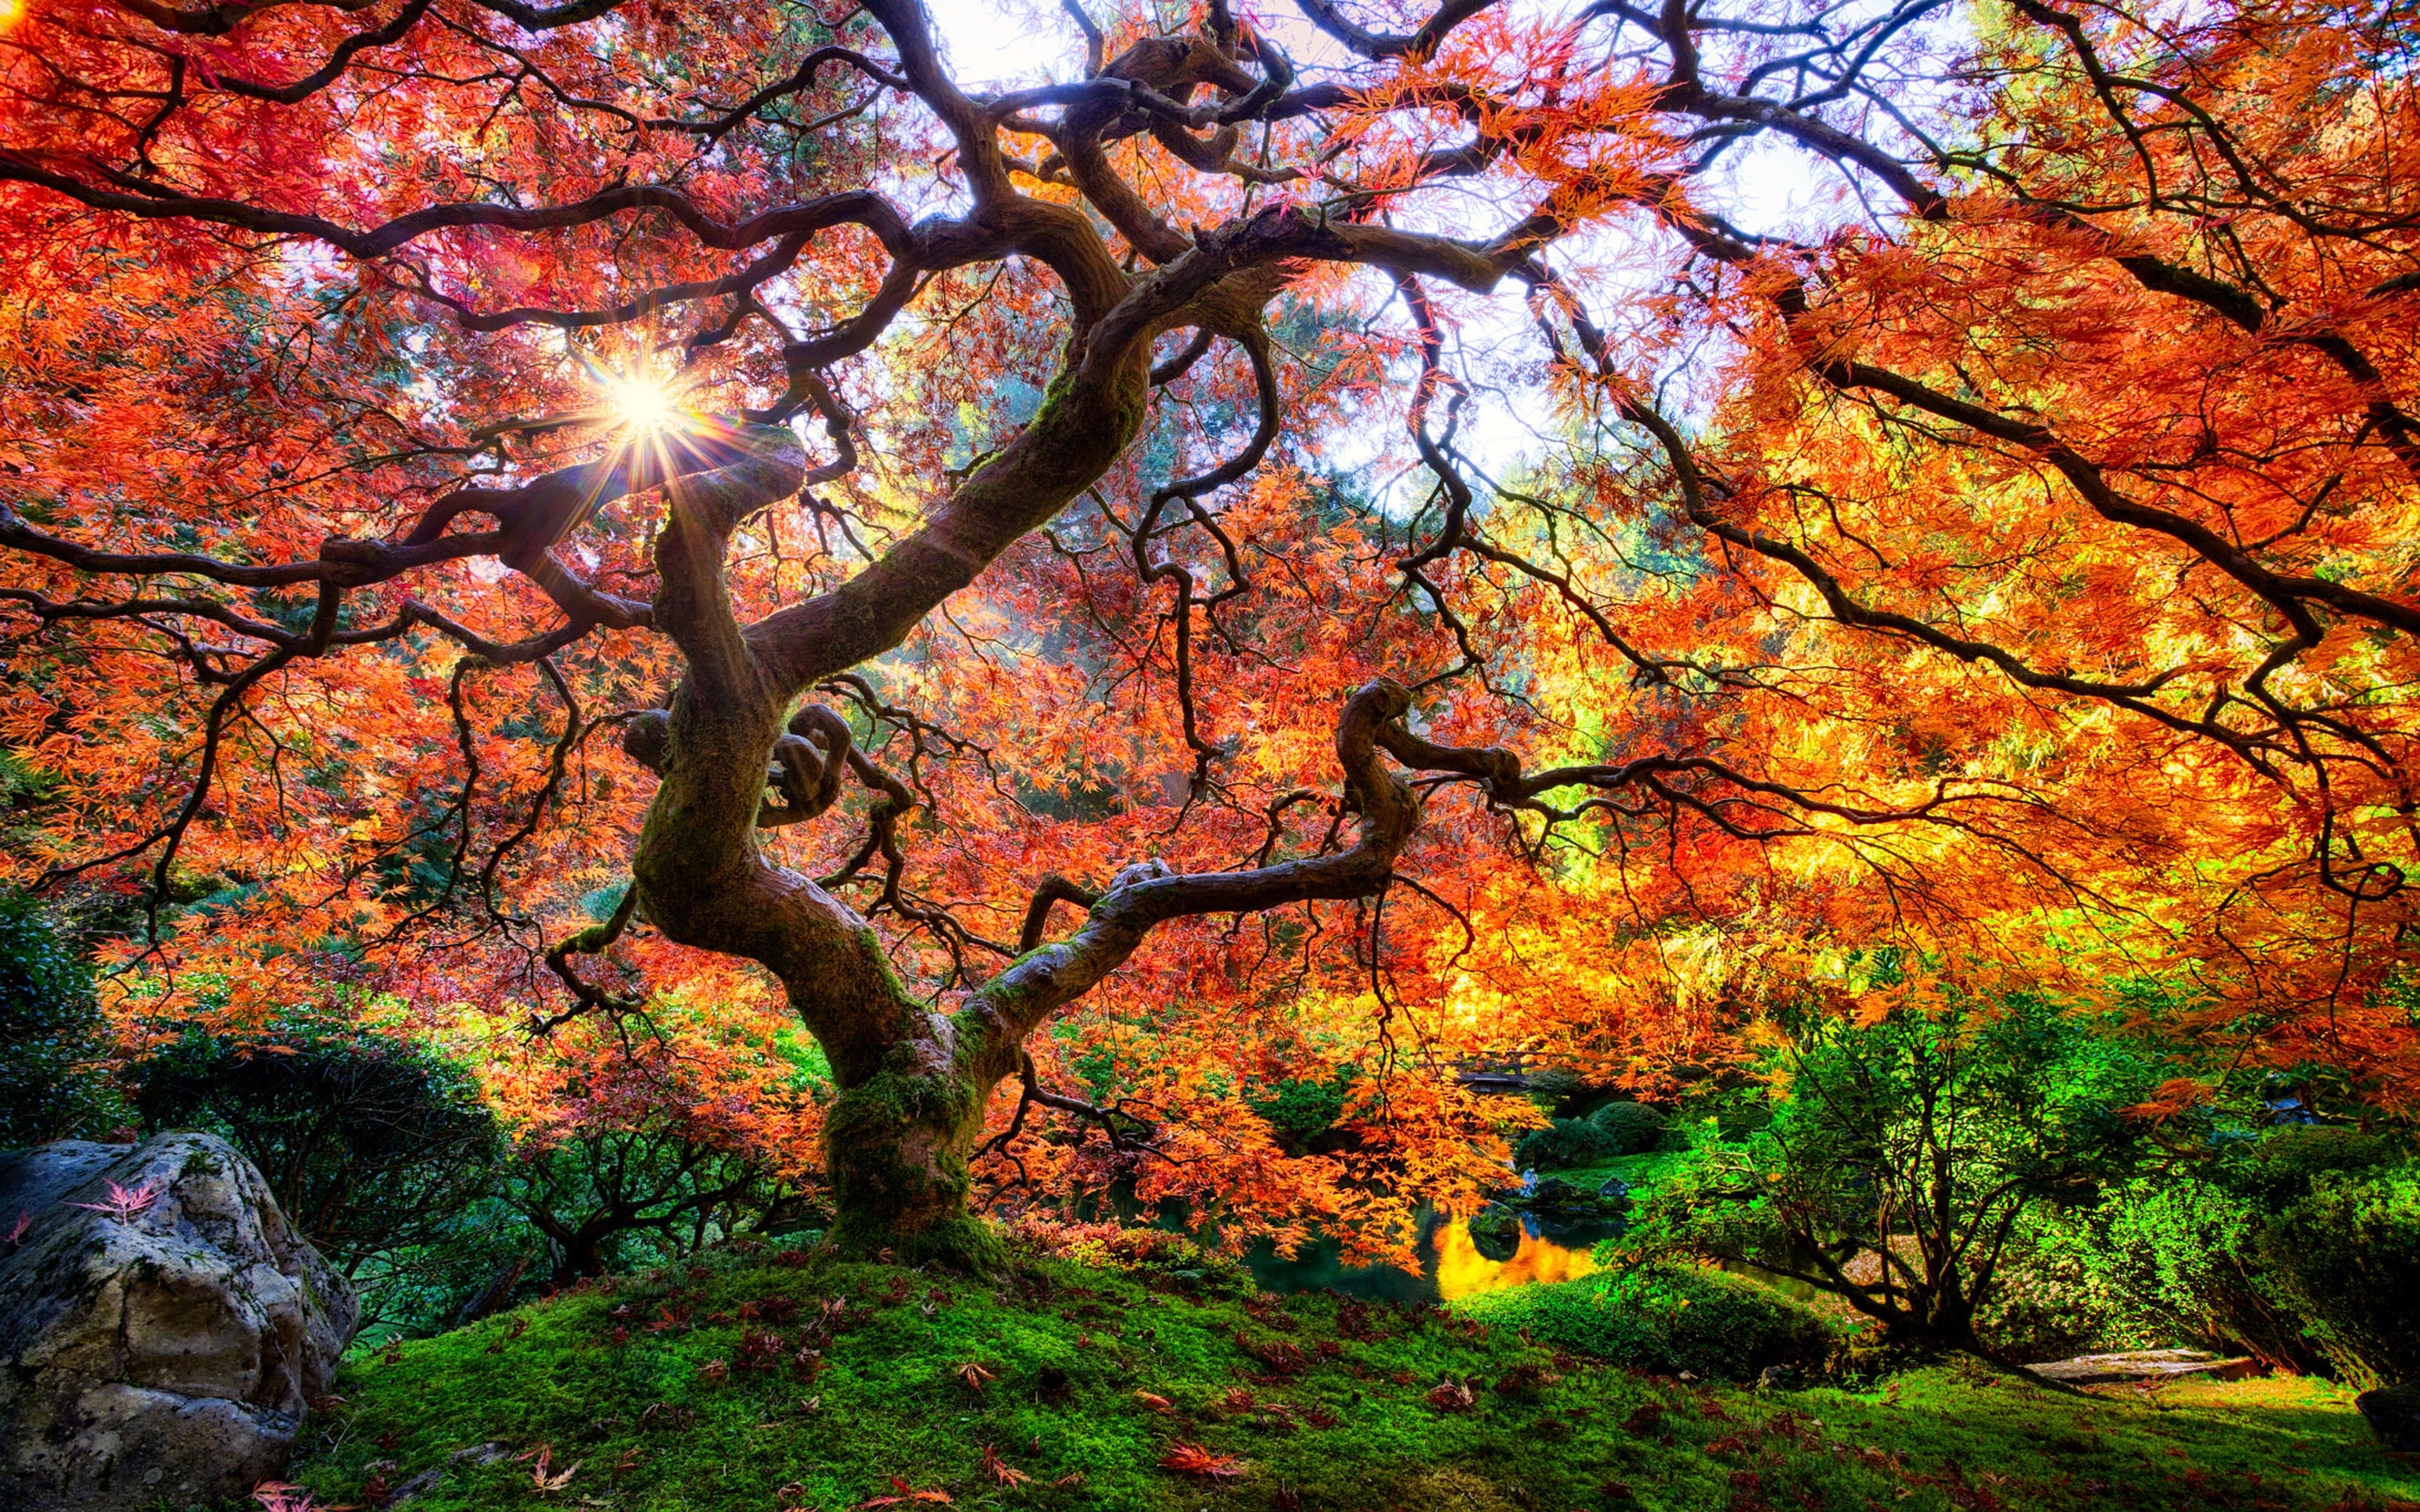 Beautiful Japanese Maple With Red Leaves At The Foot Of Portland Oregon Desktop Wallpaper Background Free Download 3840x2400, Wallpaper13.com